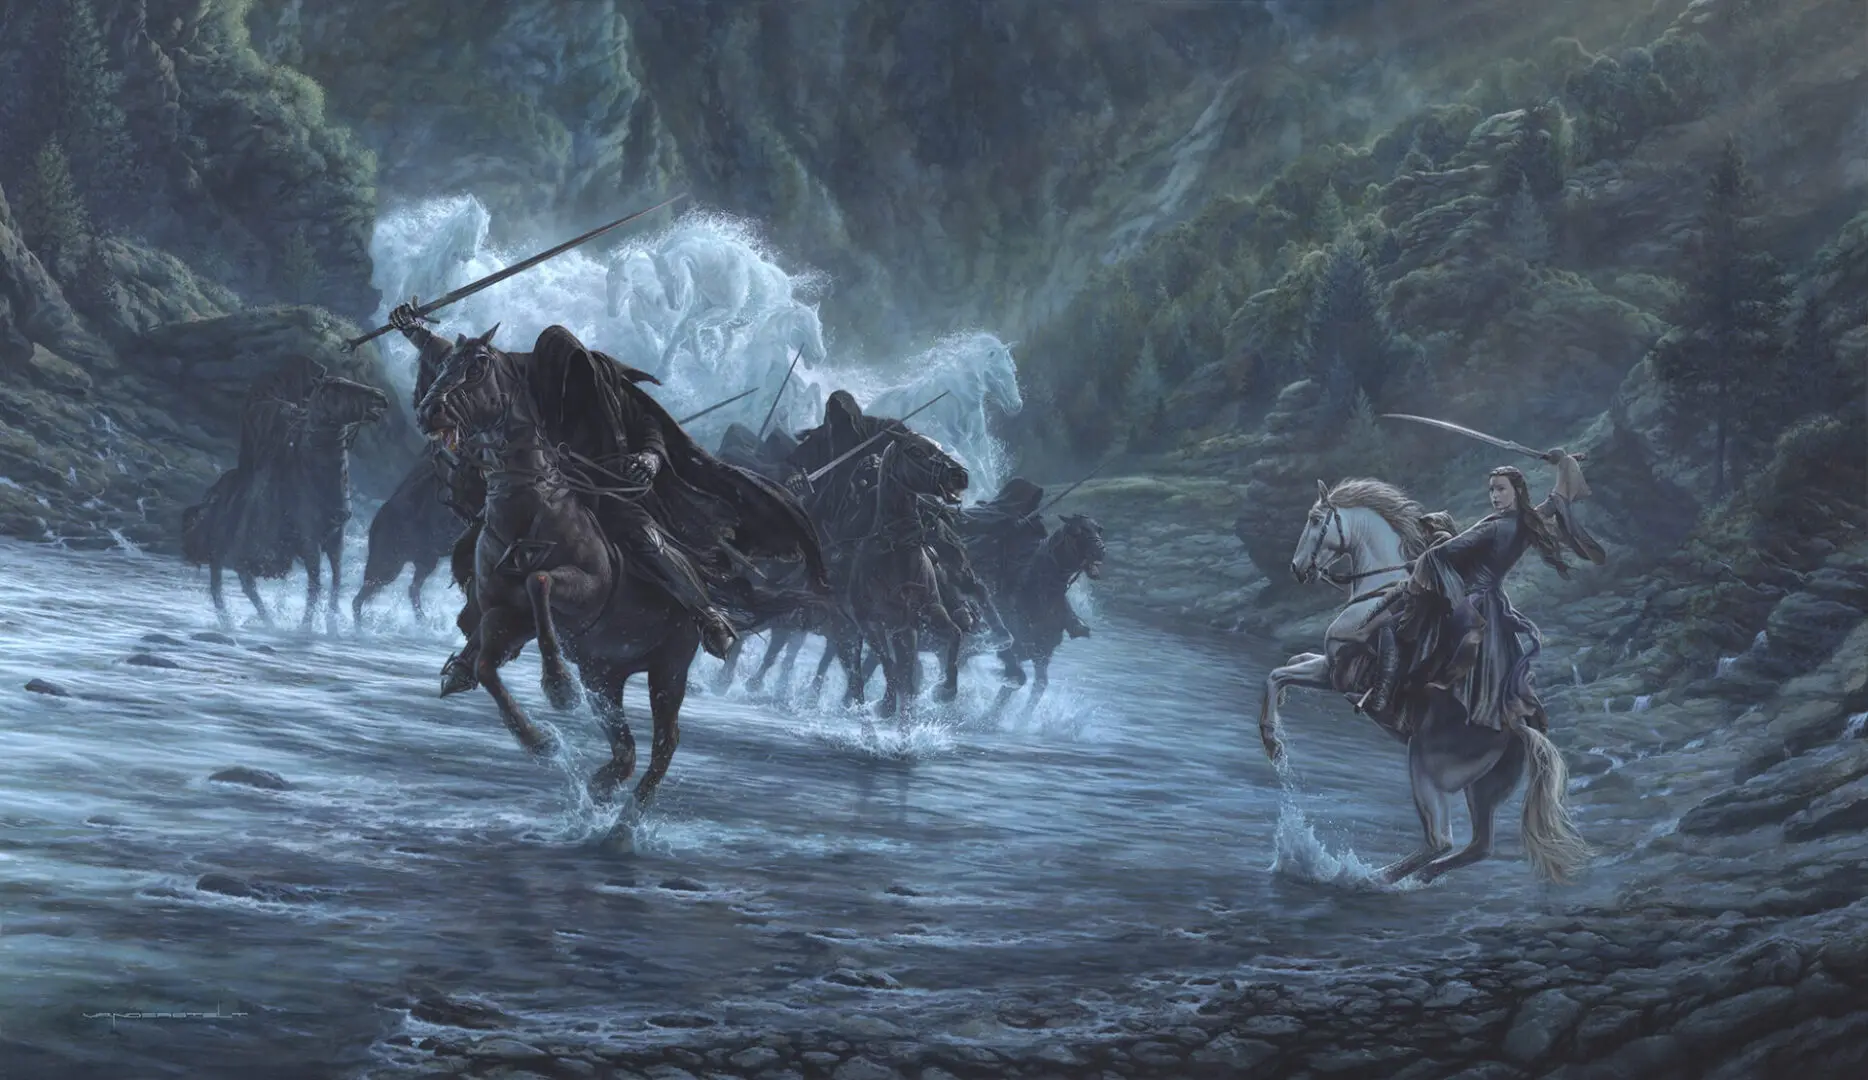 THE LORD OF THE RINGS -AT THE FORD OF BRUINEN PAINTING